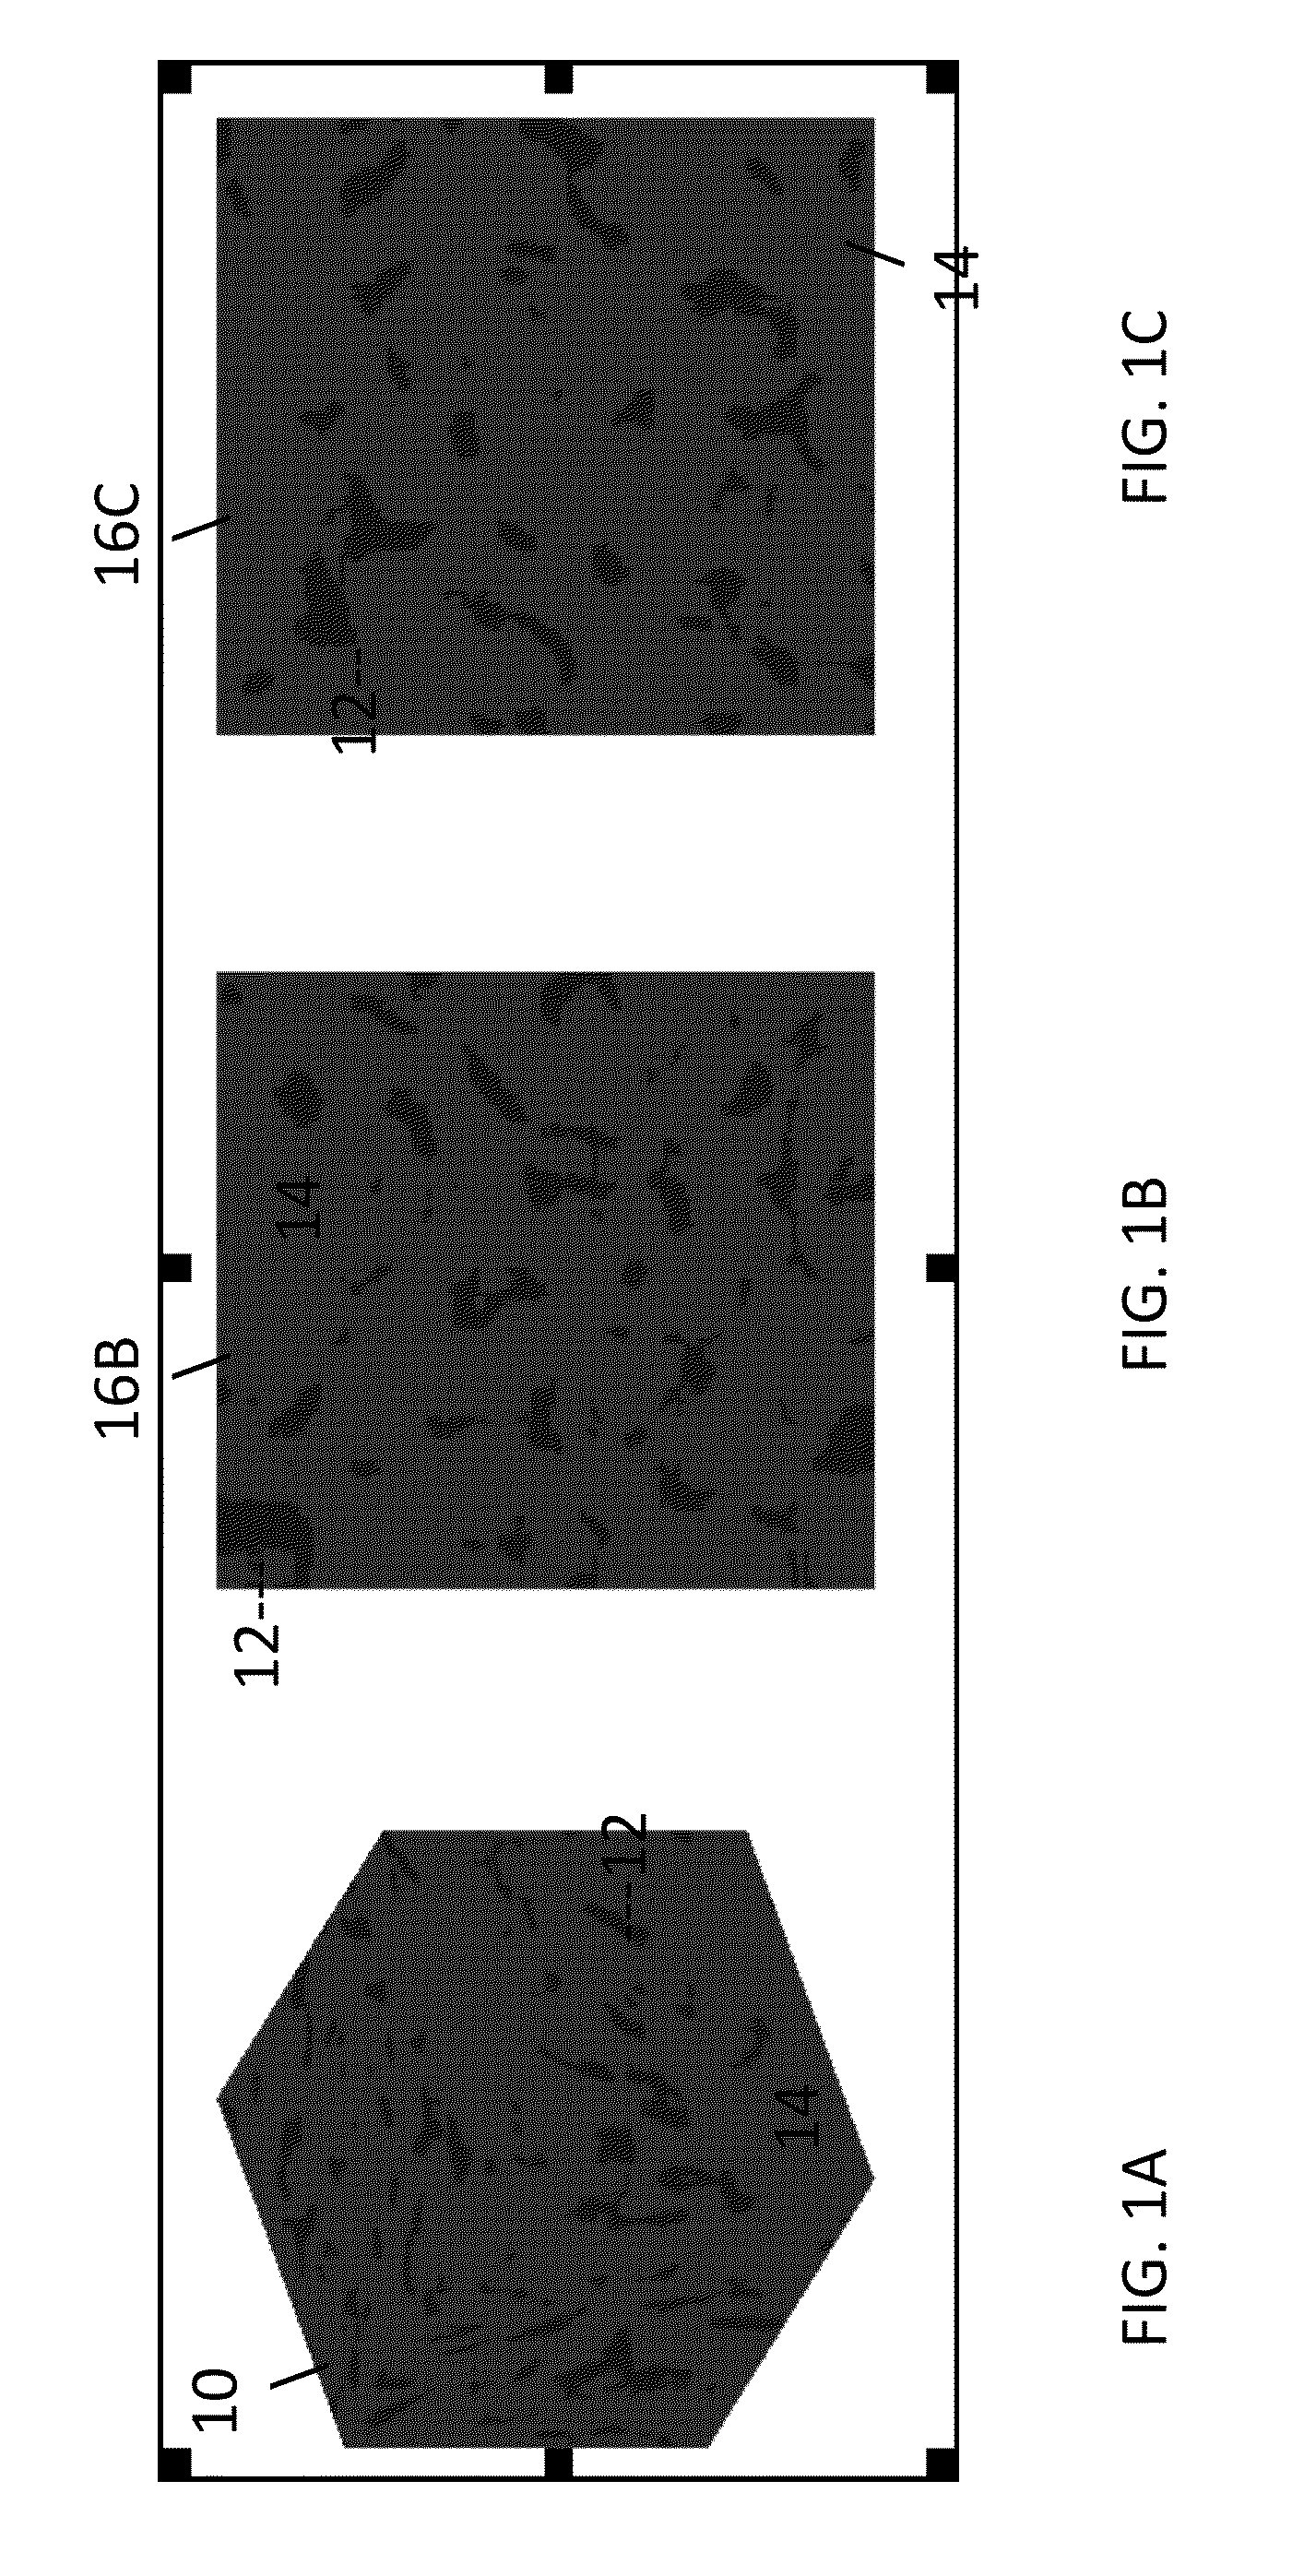 Method and system for estimating rock properties from rock samples using digital rock physics imaging